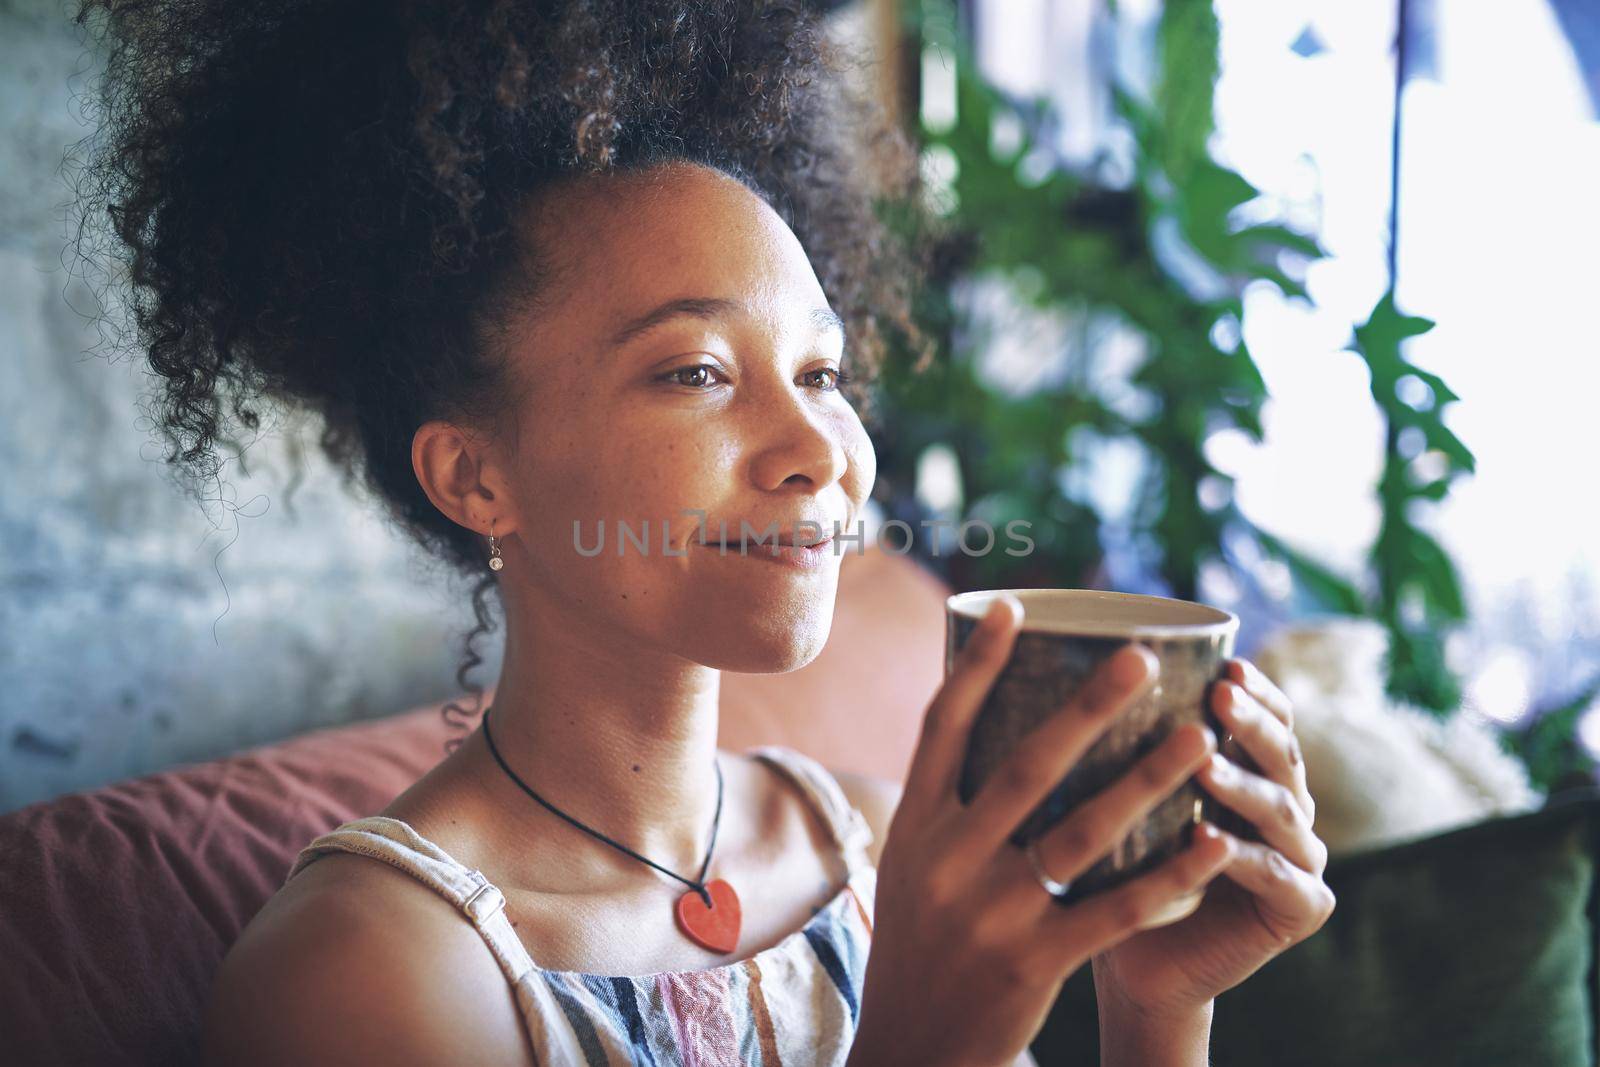 Coffee always cures everything - High quality stock photo by VizDelux